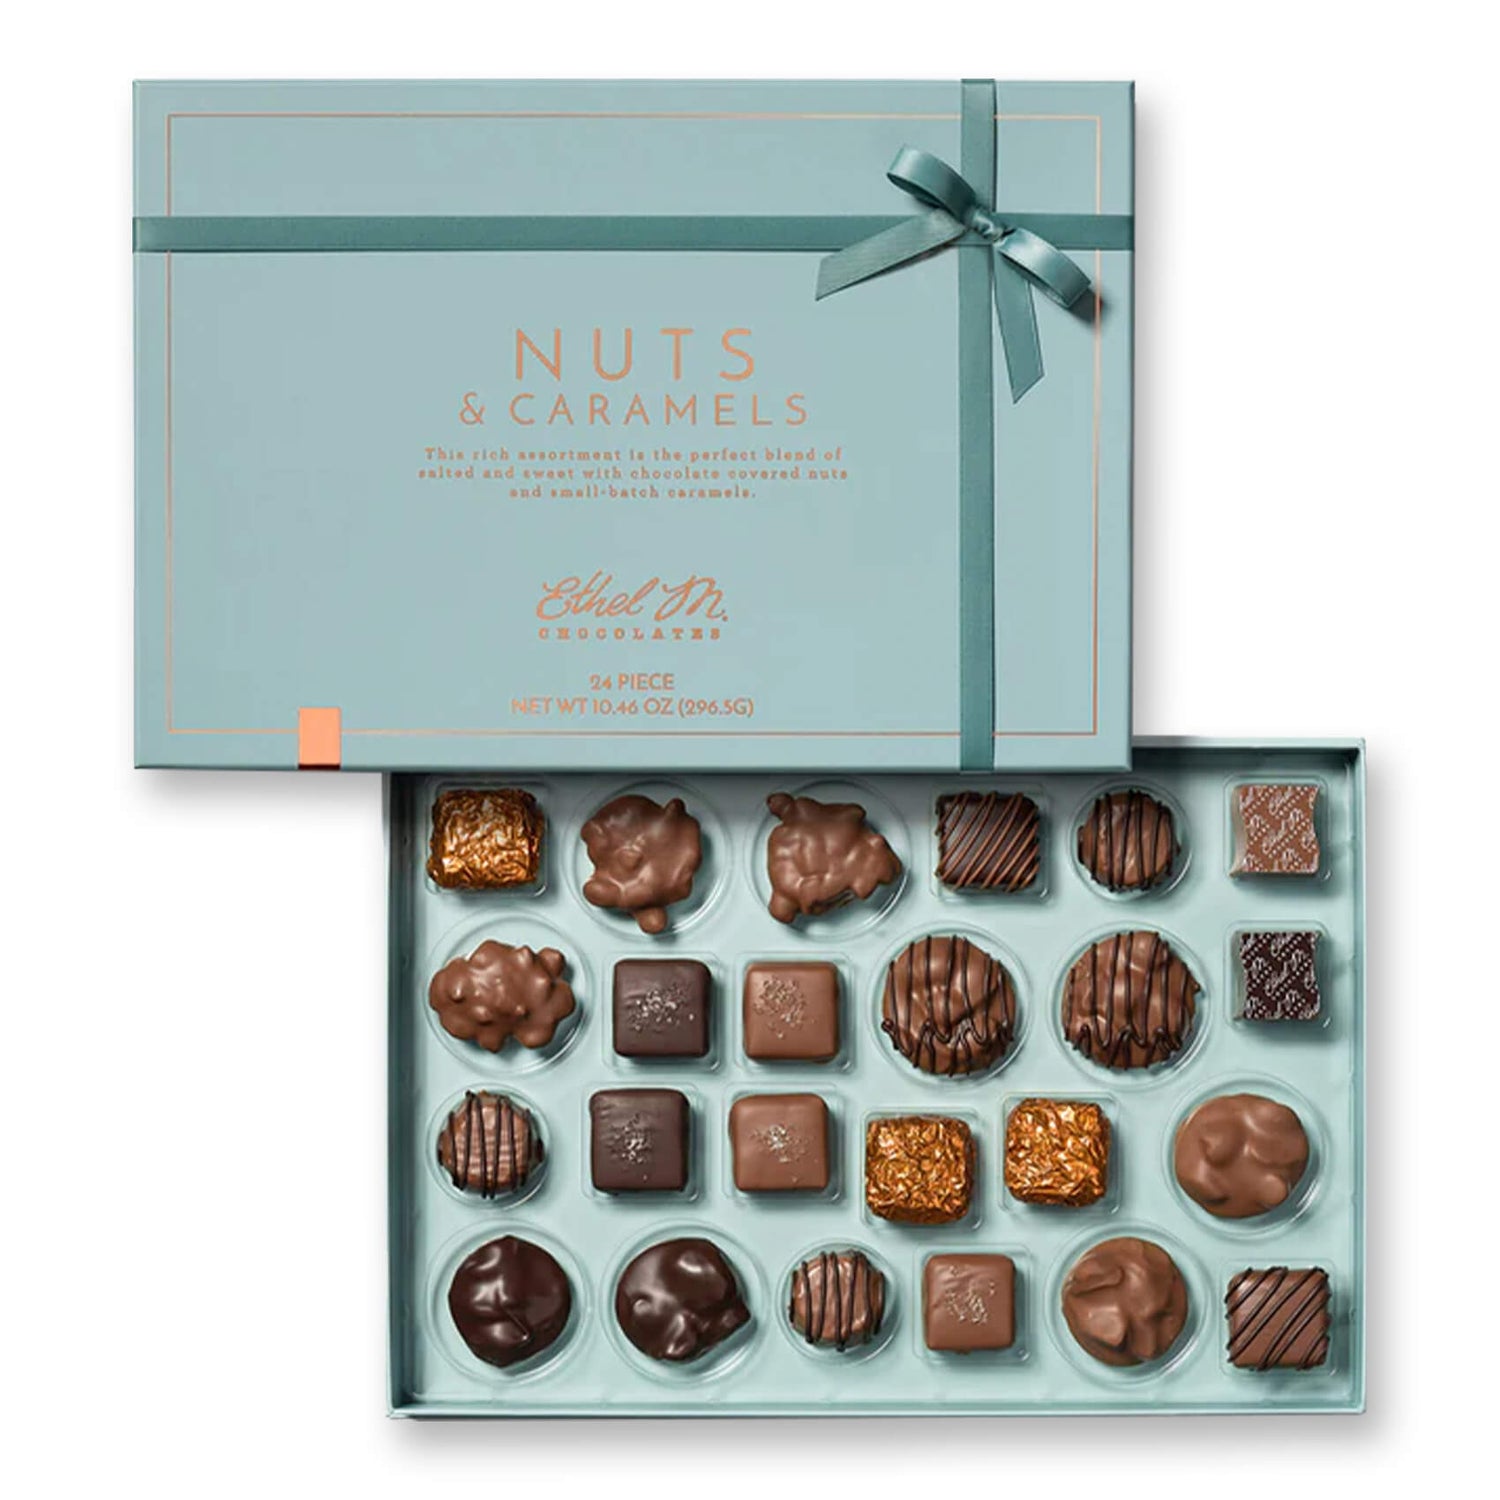 Ethel M Chocolates Nuts & Caramels Collection, 24-Piece